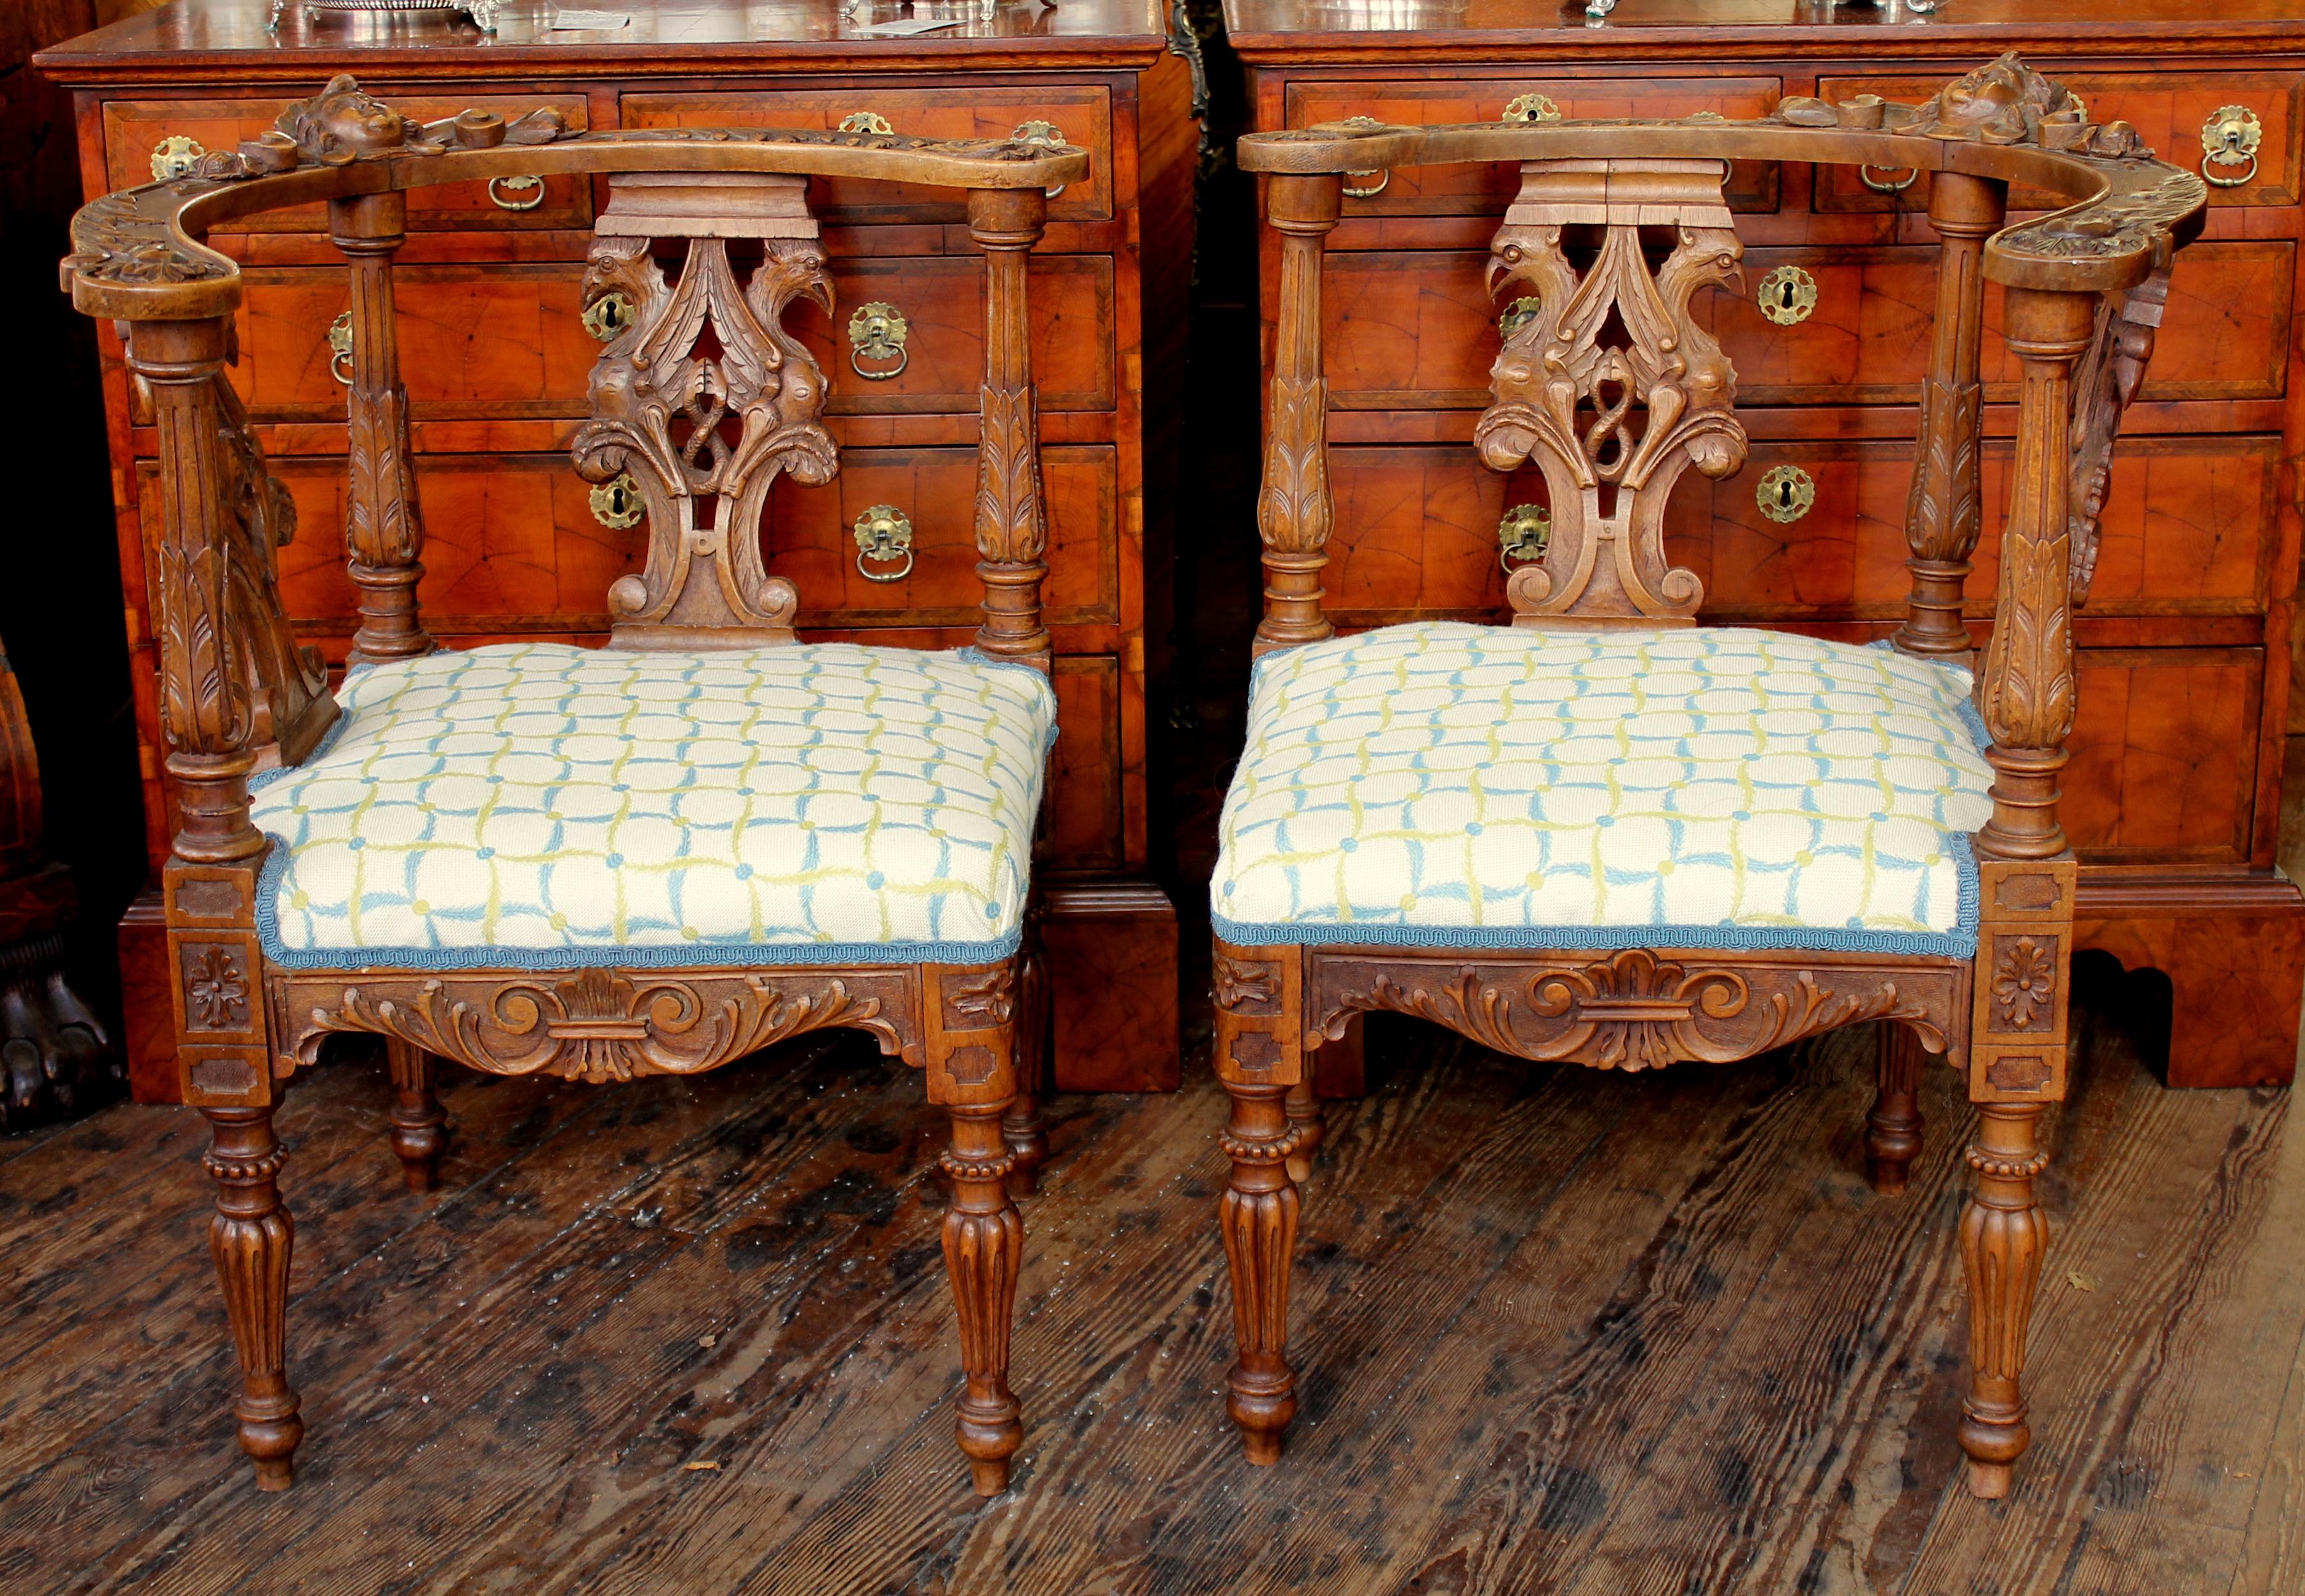 Rare and fine pair of antique Scottish hand-carved walnut Renaissance style corner chairs.
Please note exceptional bas relief hand-carved motifs, in particular the cherub or putti mask heads. The double headed eagle carved back splats are also